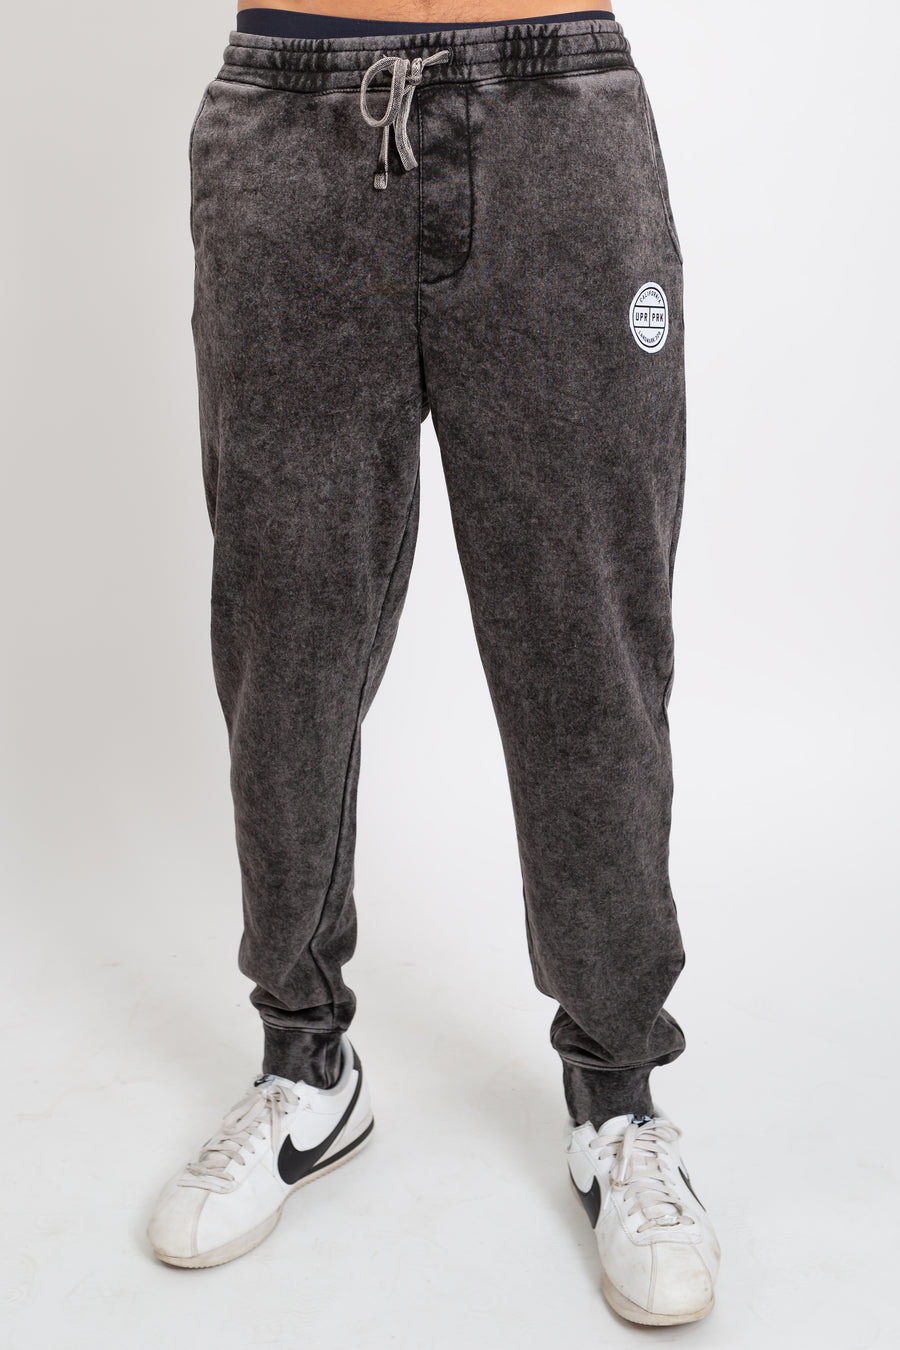 Black Greatness Revolves Around You Mineral Wash Sweatpants